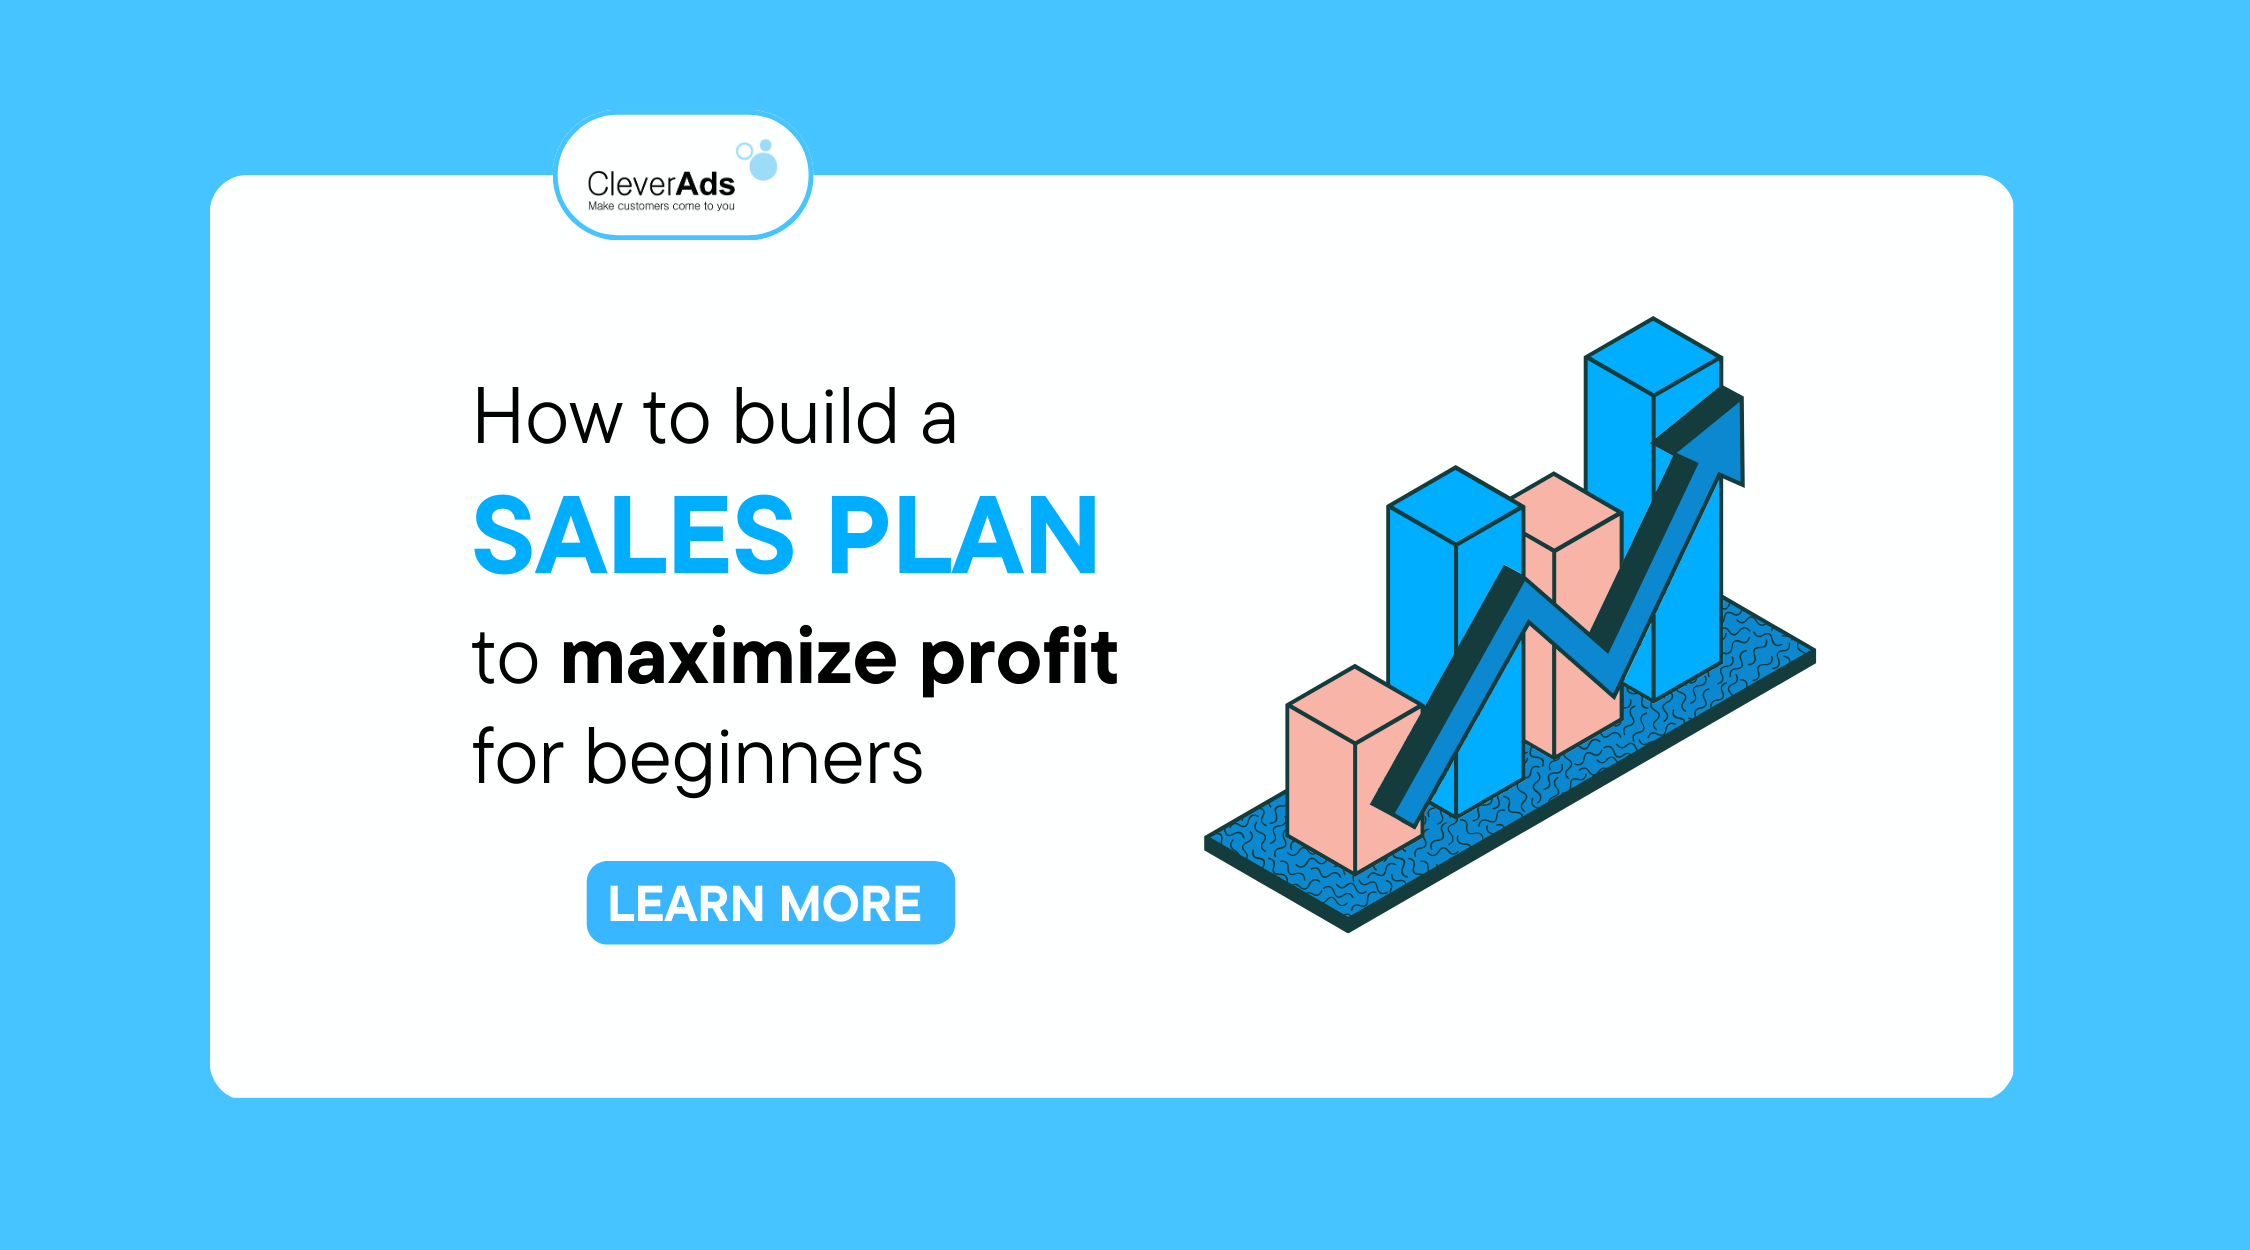 How to build a sales plan to maximize profit for beginners